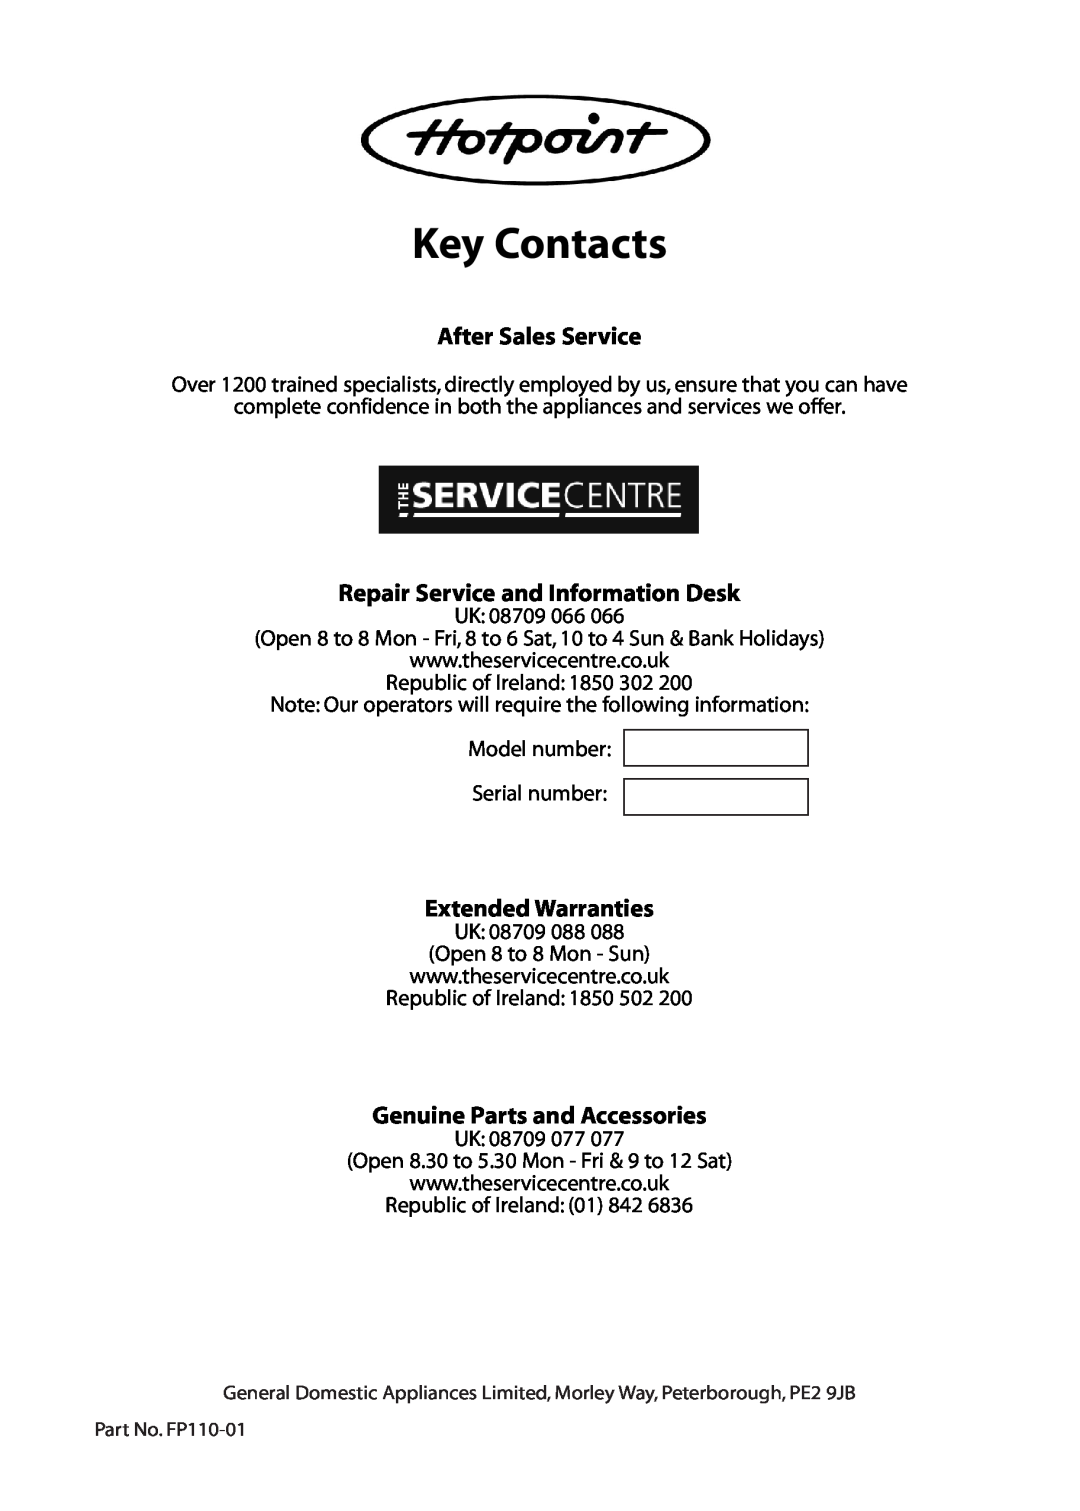 Hotpoint FFU00 manual Key Contacts, After Sales Service, Repair Service and Information Desk, Extended Warranties 